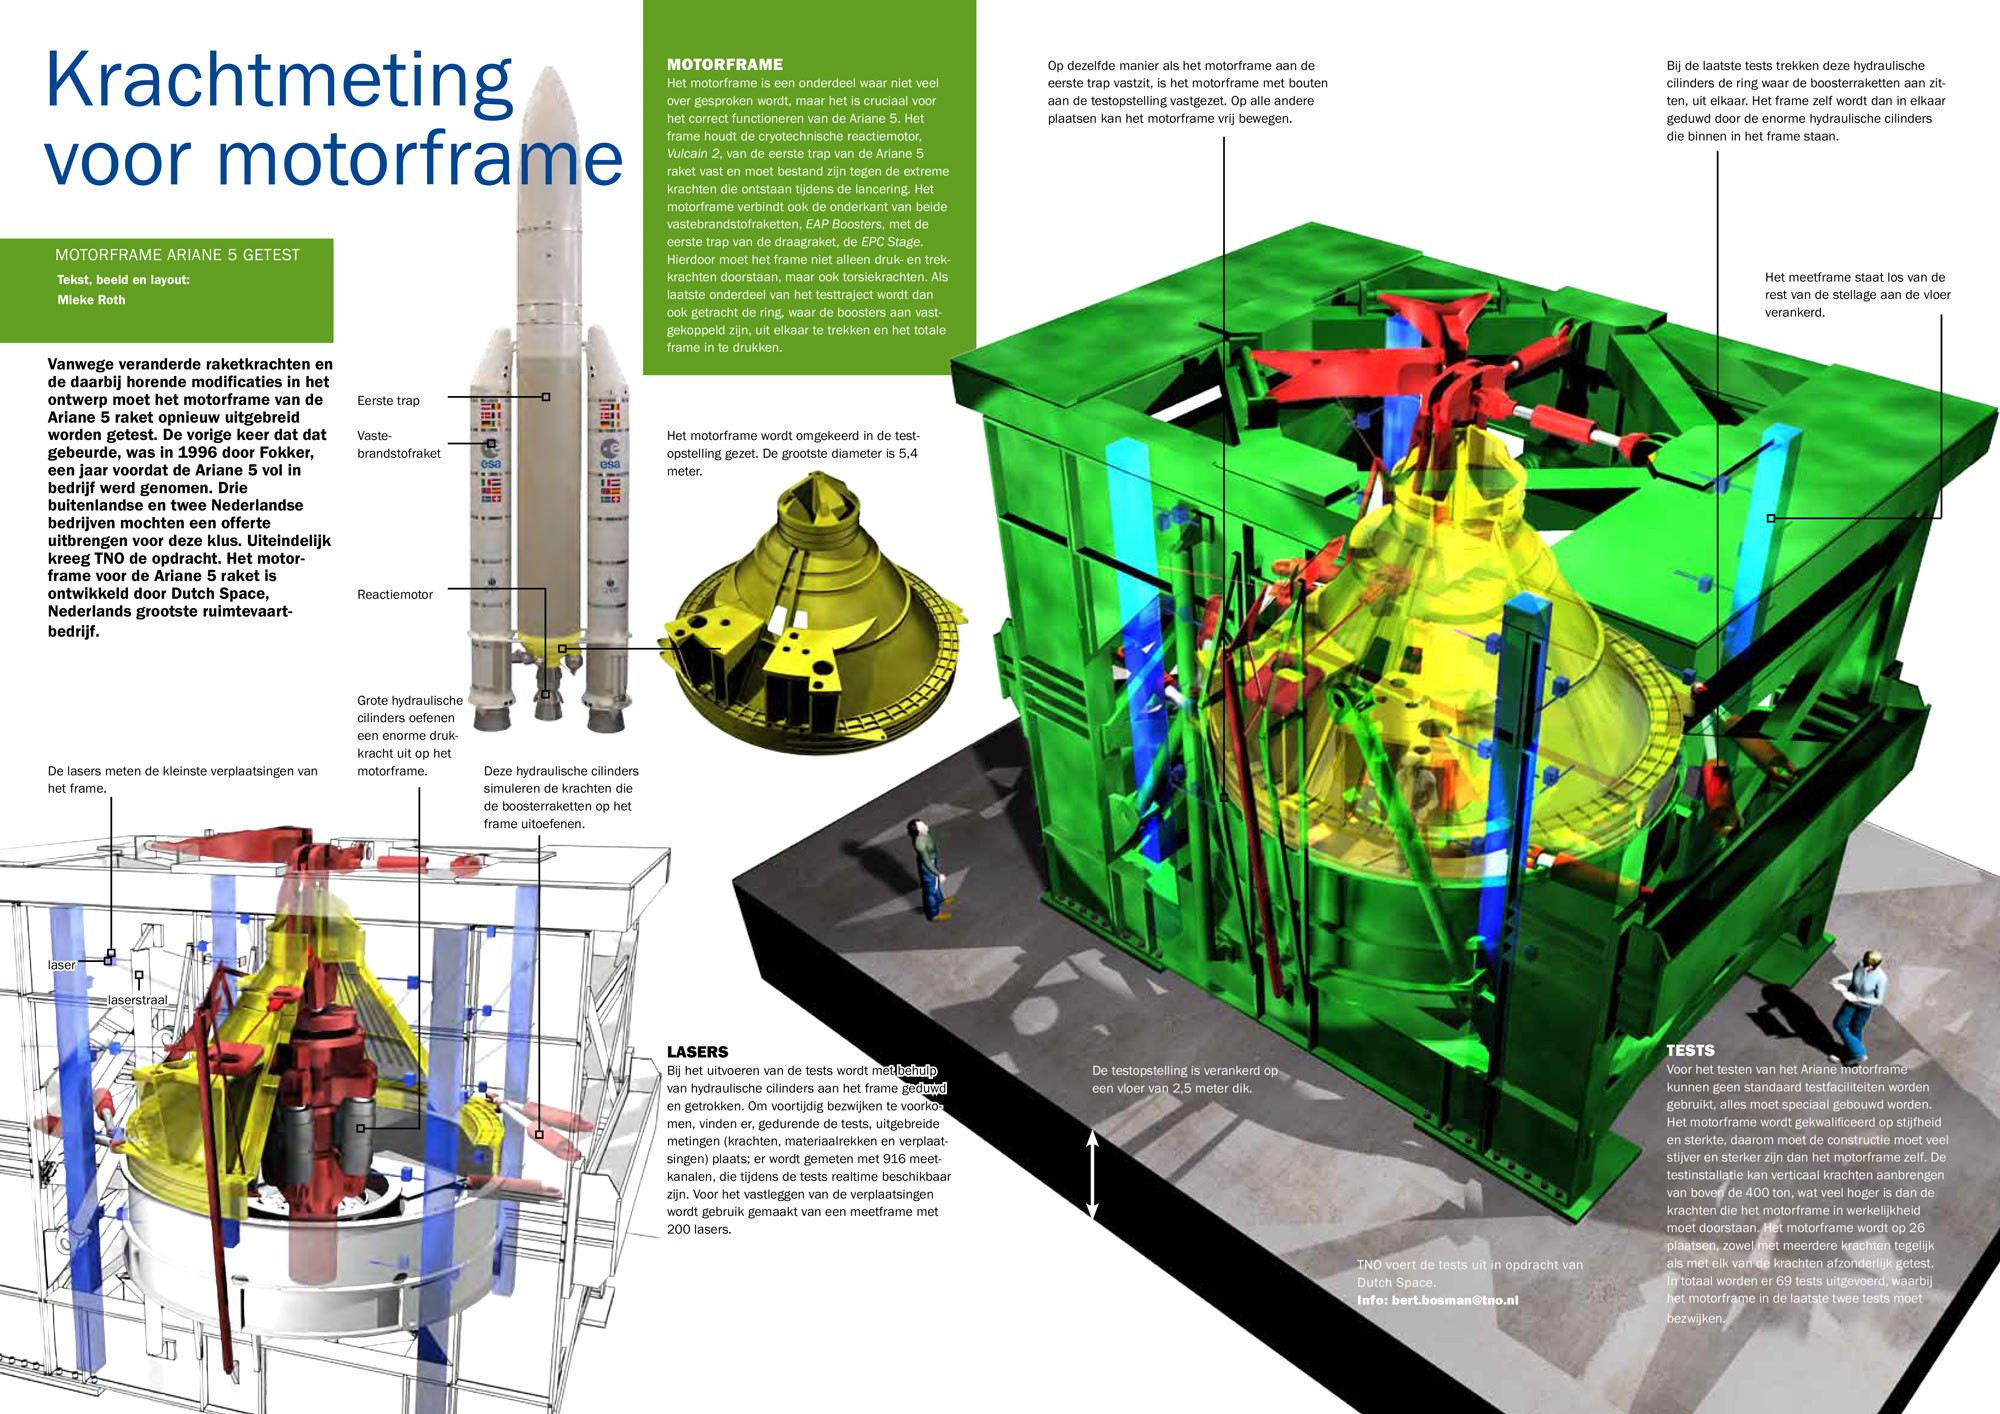 Spread about the test facility where the motor frame of the Ariane 5 rocket was tested